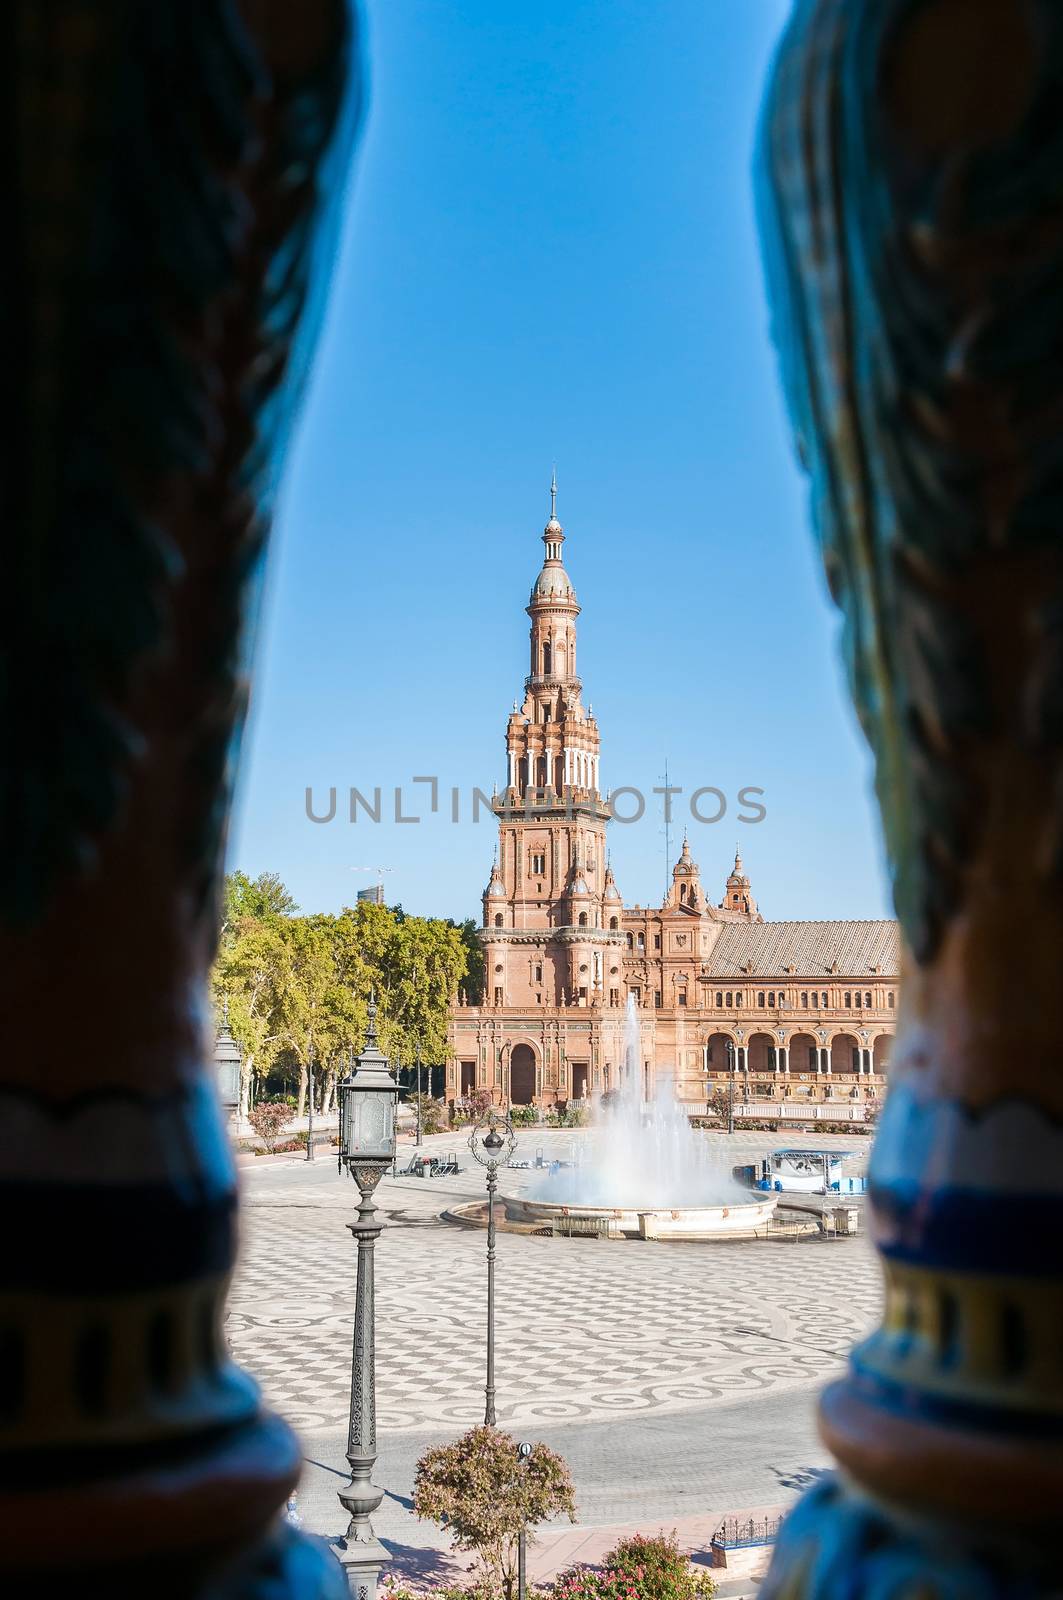 Tower of the Plaza de Espana in Seville by mkos83